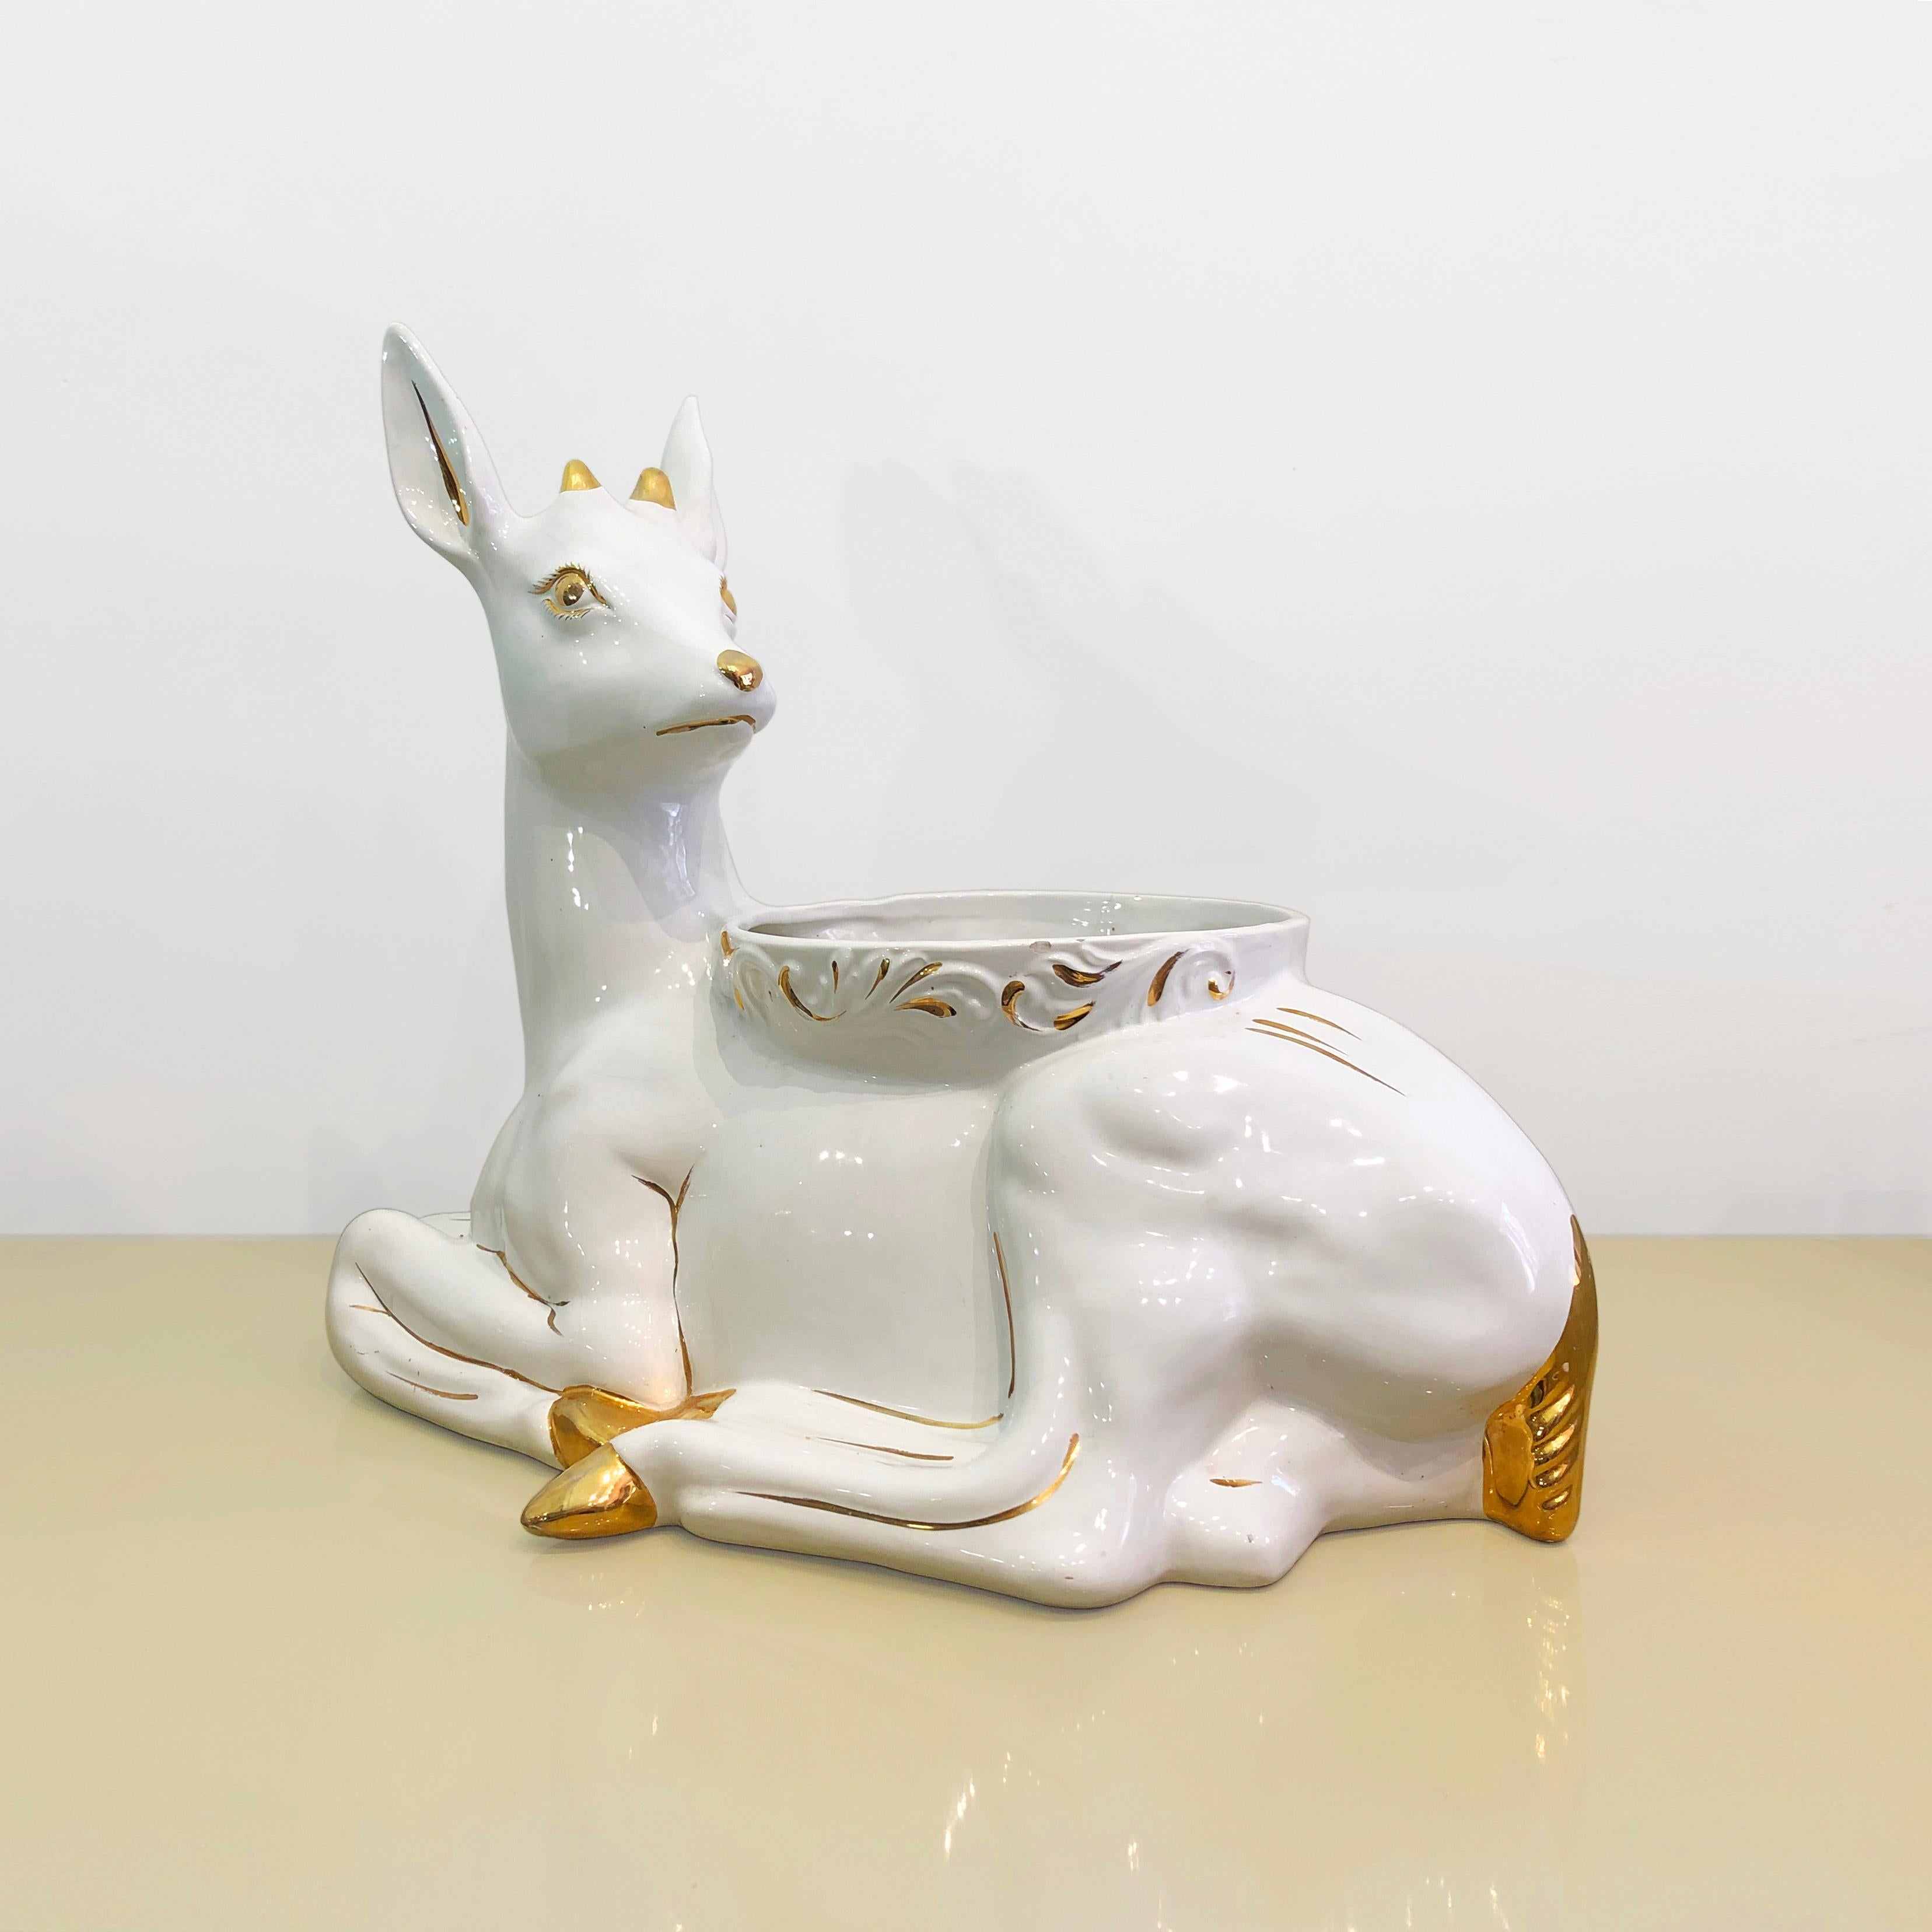 This nature inspired ceramic glazed planter by Antica Athena consists of a white deer faun with gold plated detailing. This faun brings in mind the nature and motherly love that this young deer seems to gaze at, with some humour attached to it